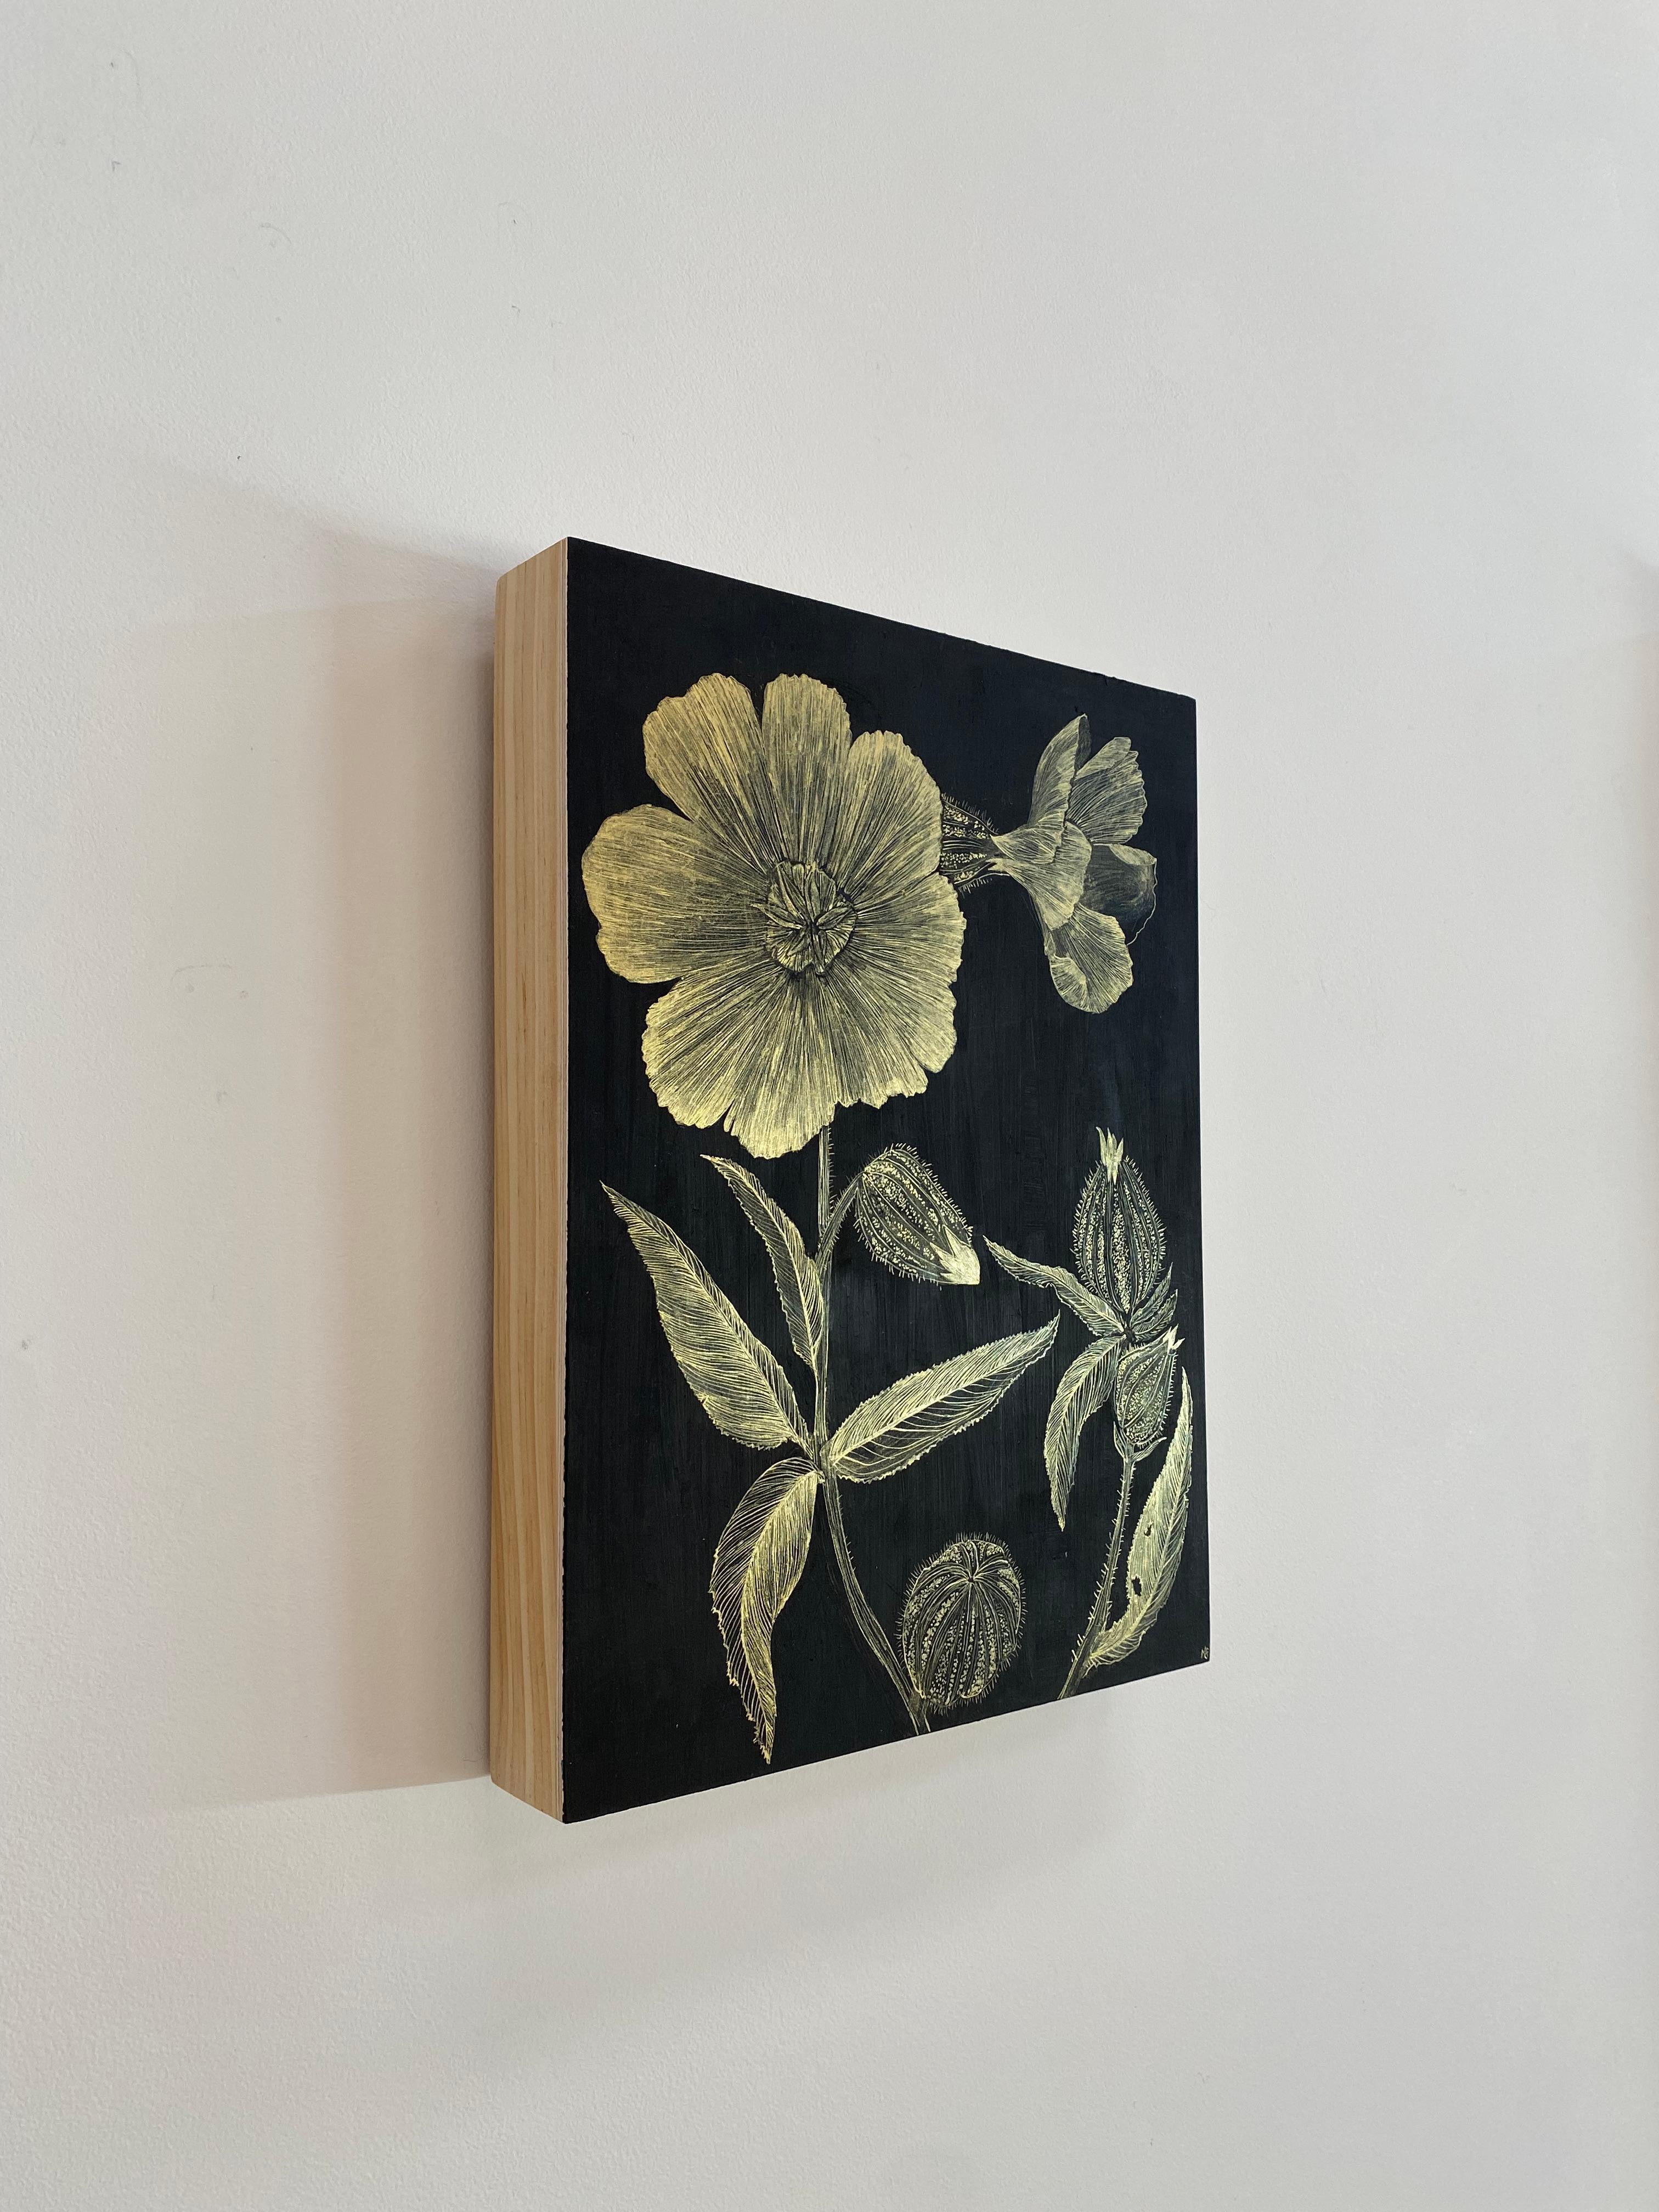 Marshmallow Two, Gold Flowers, Leaves Stem, Metallic Botanical Painting on Black For Sale 2